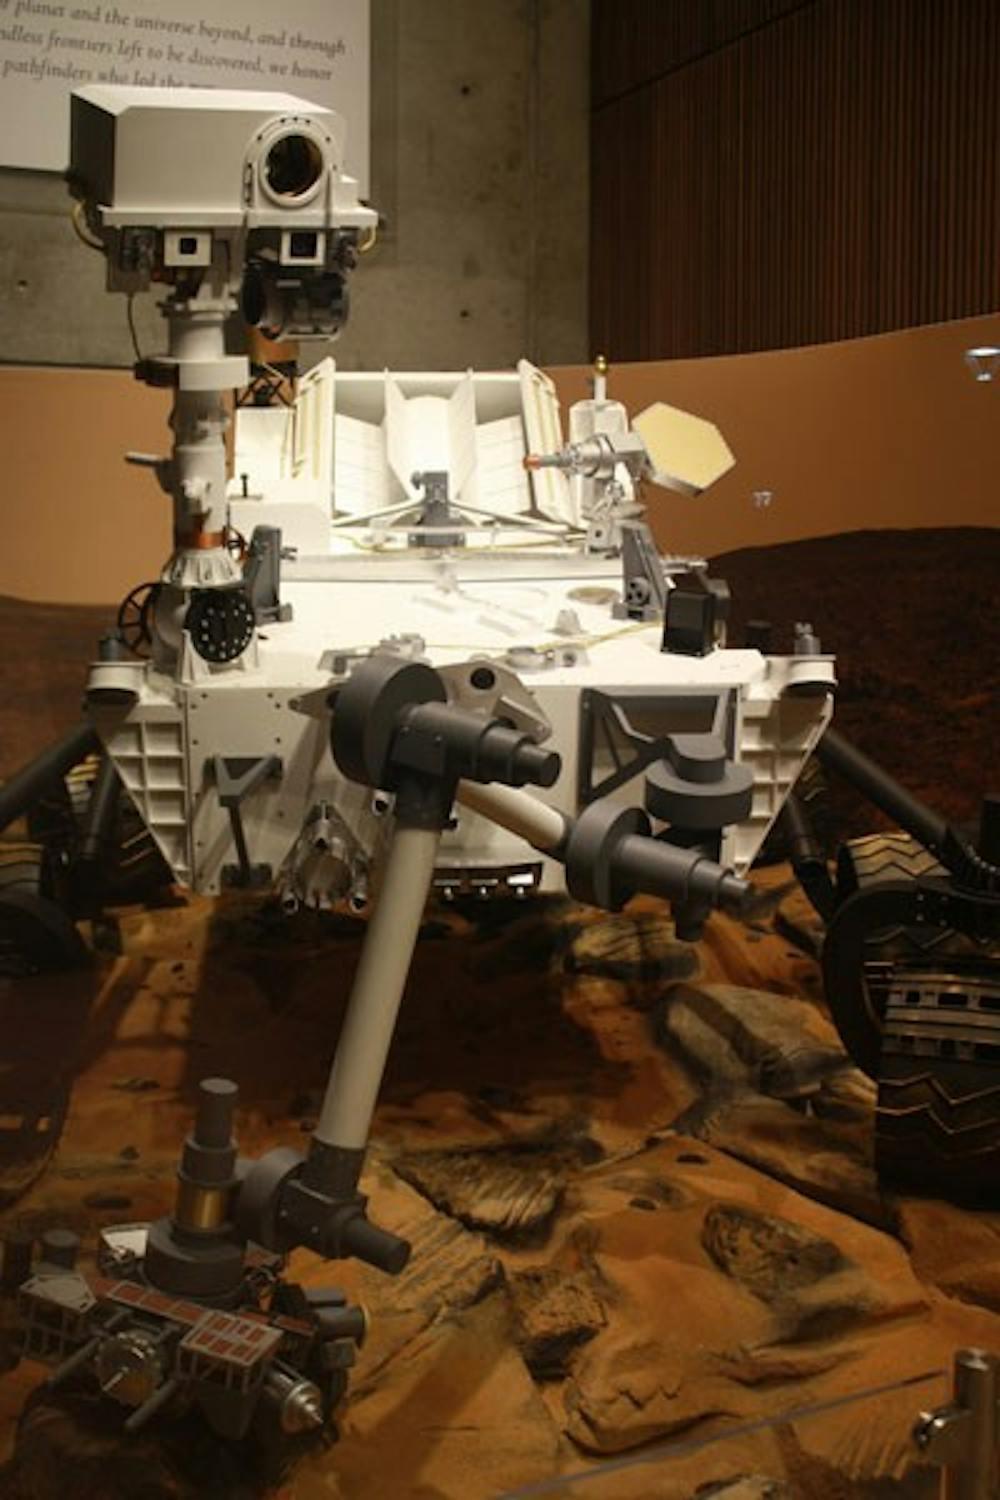 In the School of Earth and Space Exploration, students find replicas of the Mars Rover and spaceships that have helped scientists learn more about the nature of space and understand its complexity. (Photo by Hector Salas Almeida)